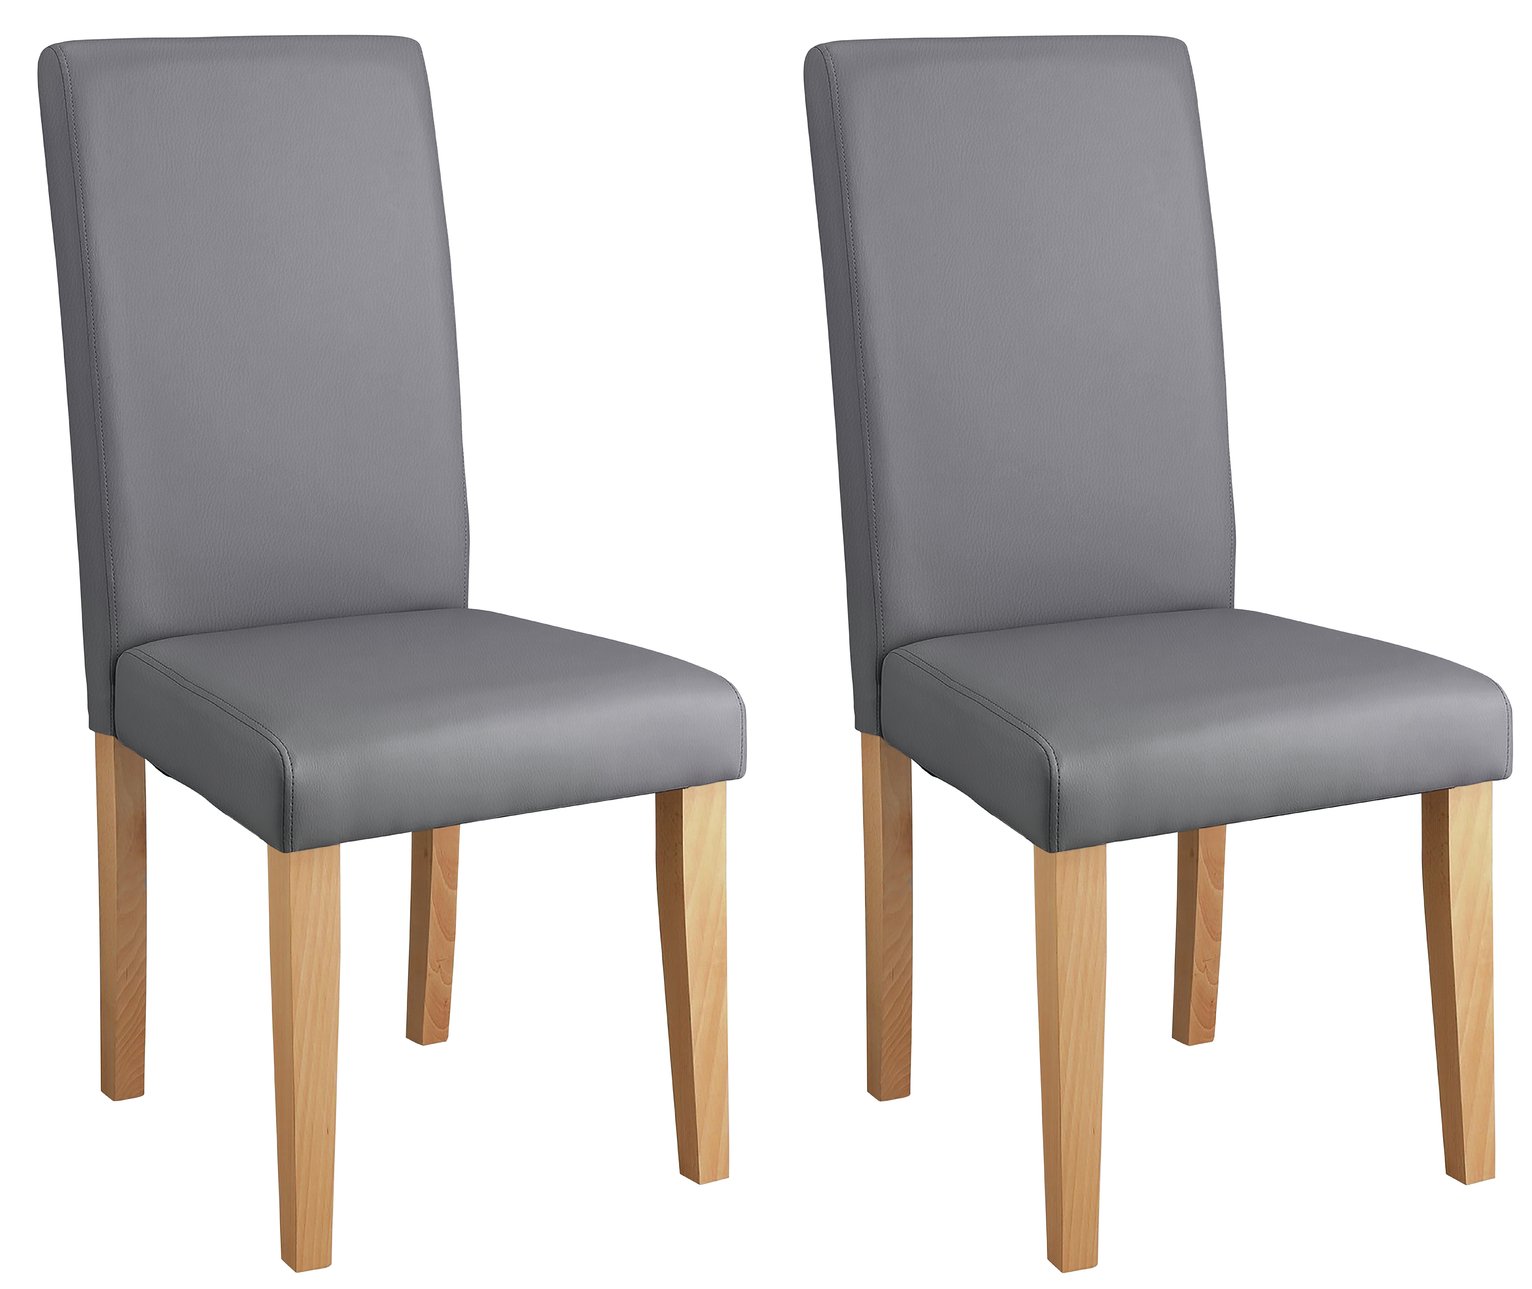 Argos Home Pair of Midback Dining Chairs - Grey